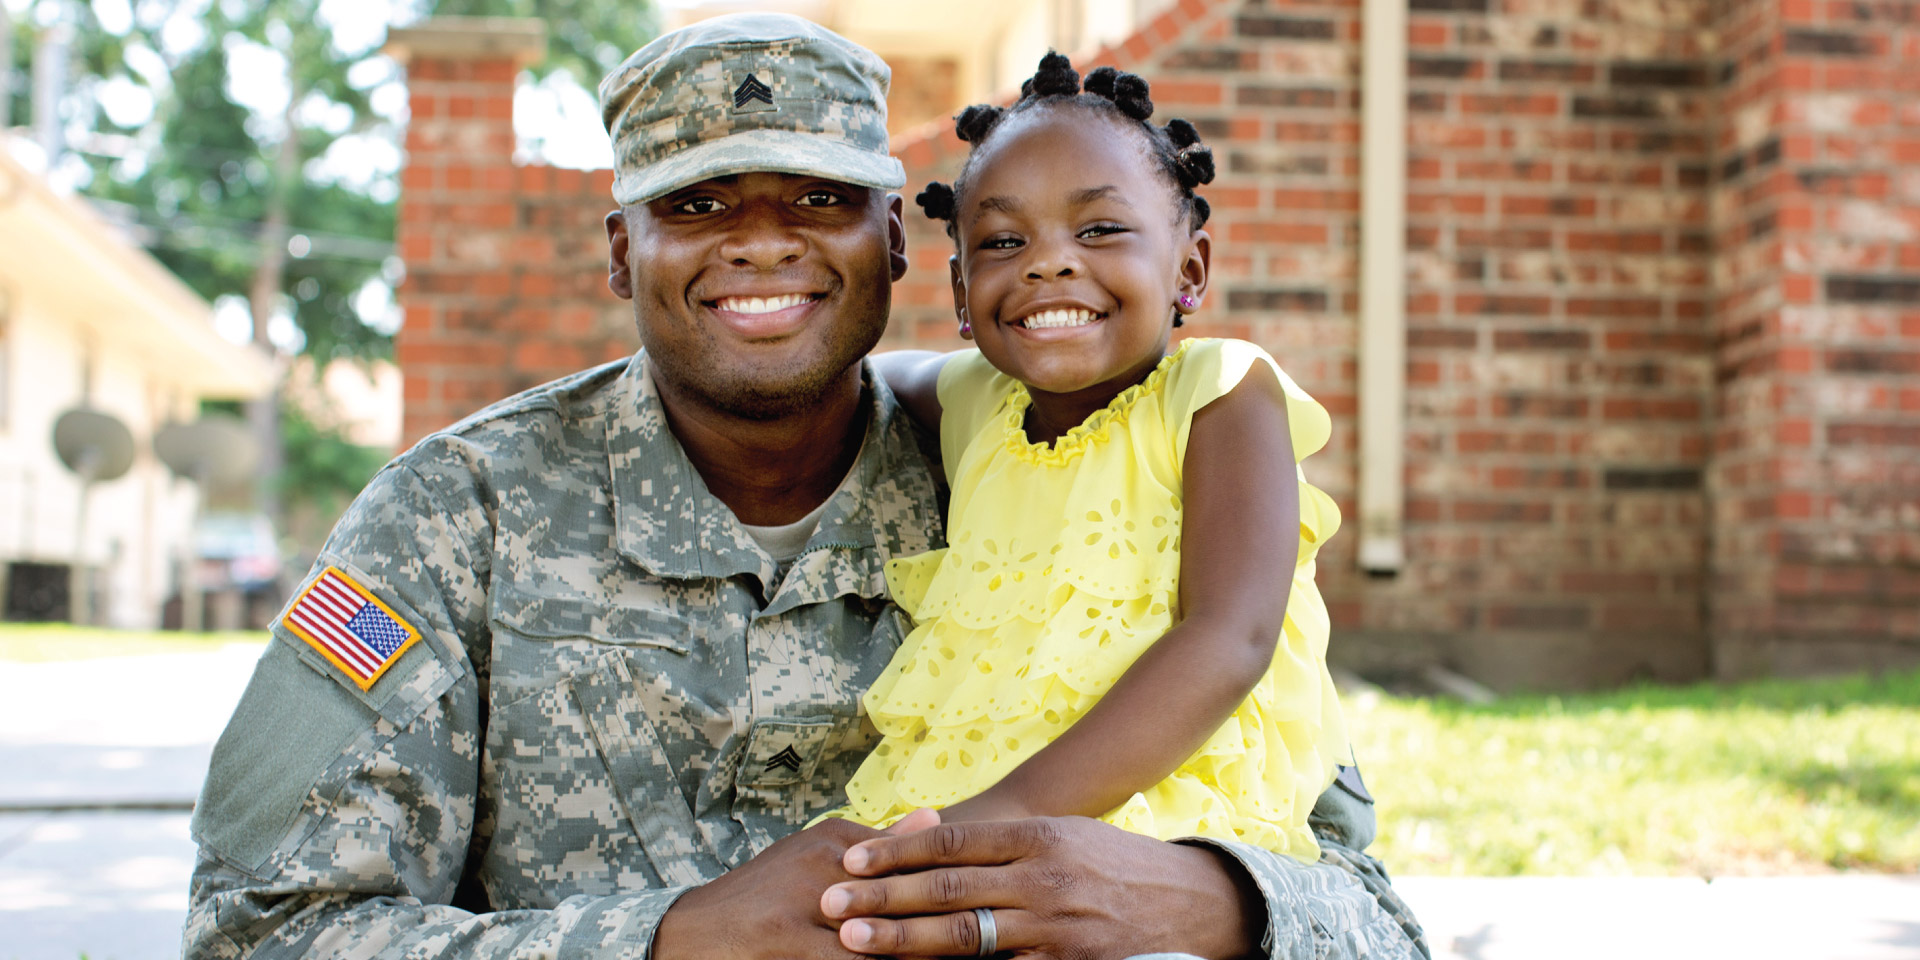 A man in a military uniform squats and smiles with his daughter on his knee.